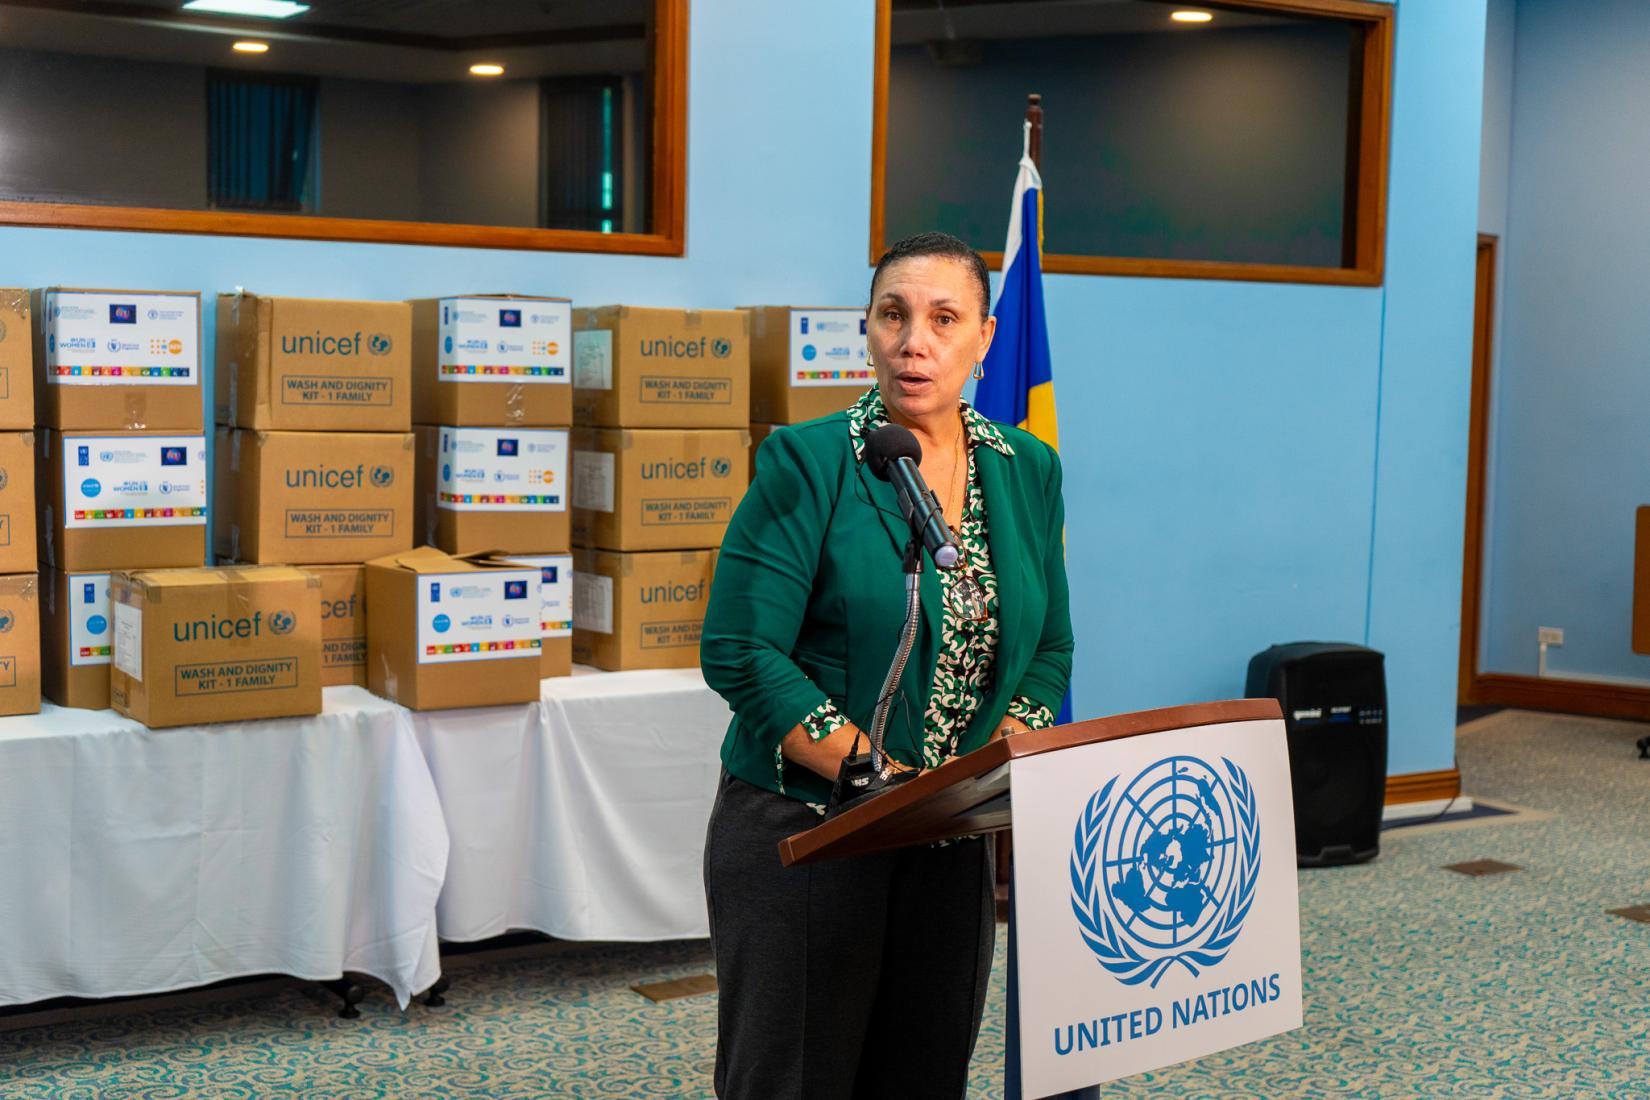 Woman at podium speaking into microphone to an audience with boxes behind her